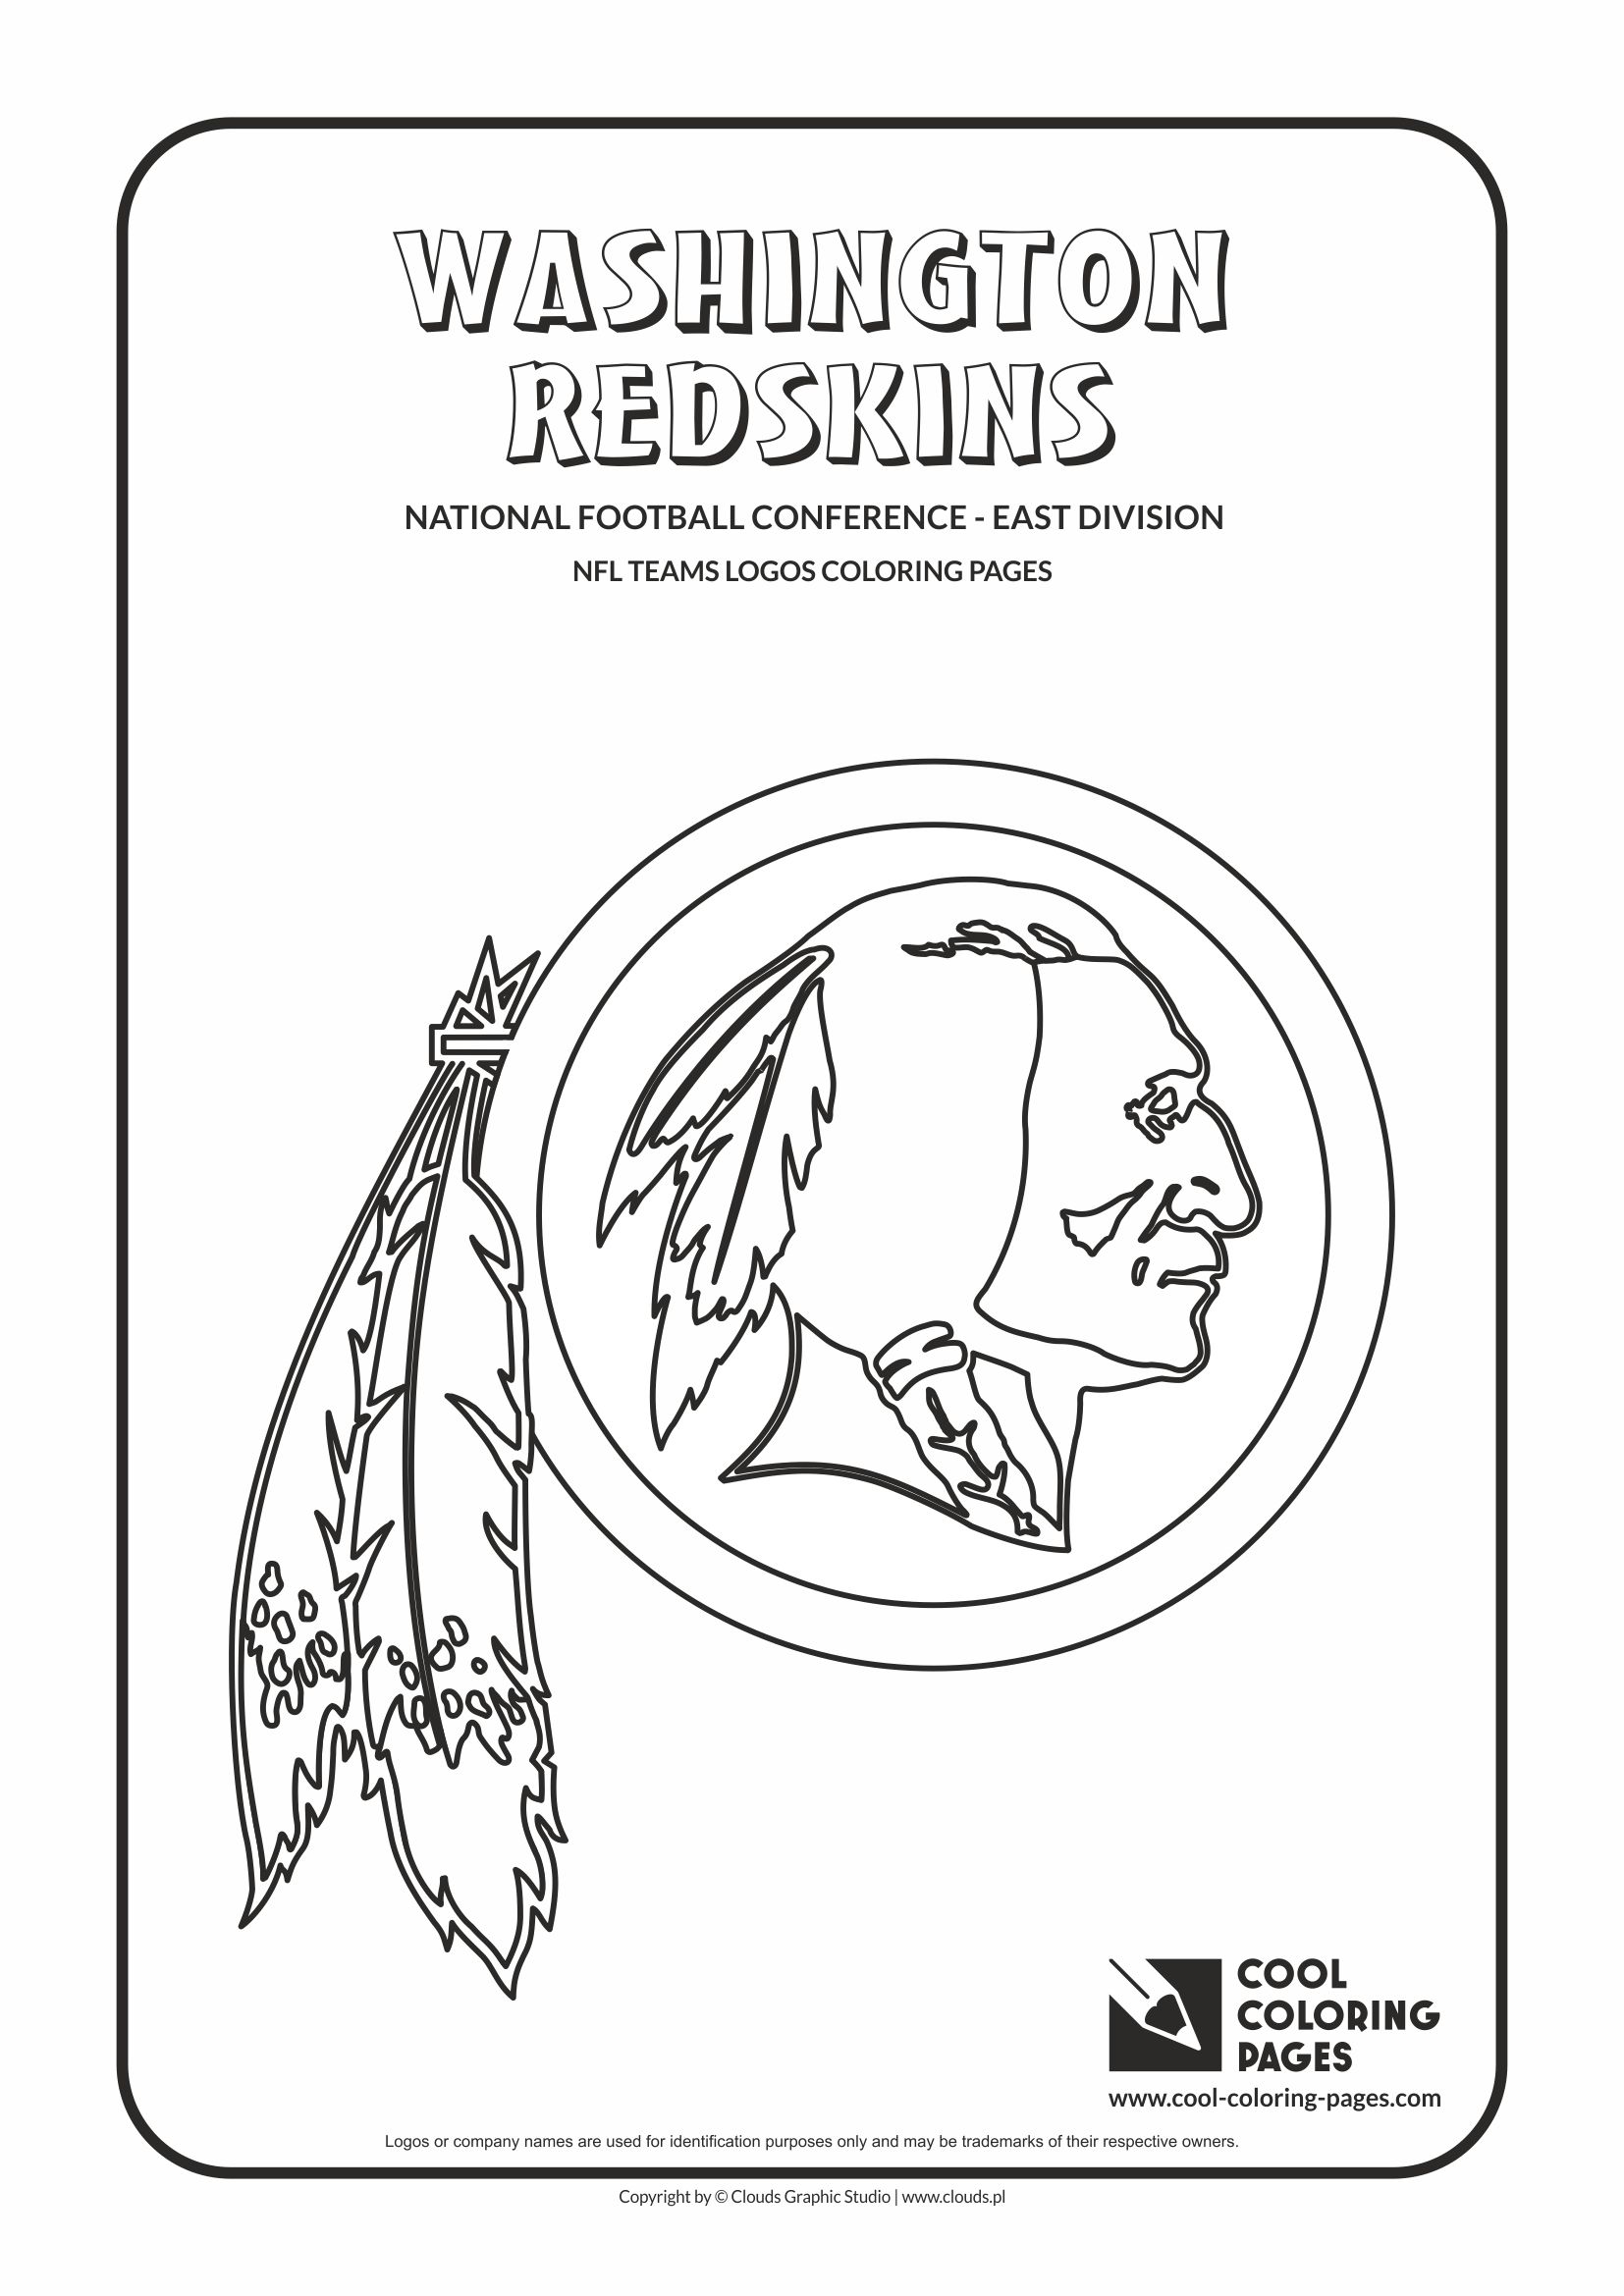 Cool Coloring Pages Washington Redskins NFL American football teams